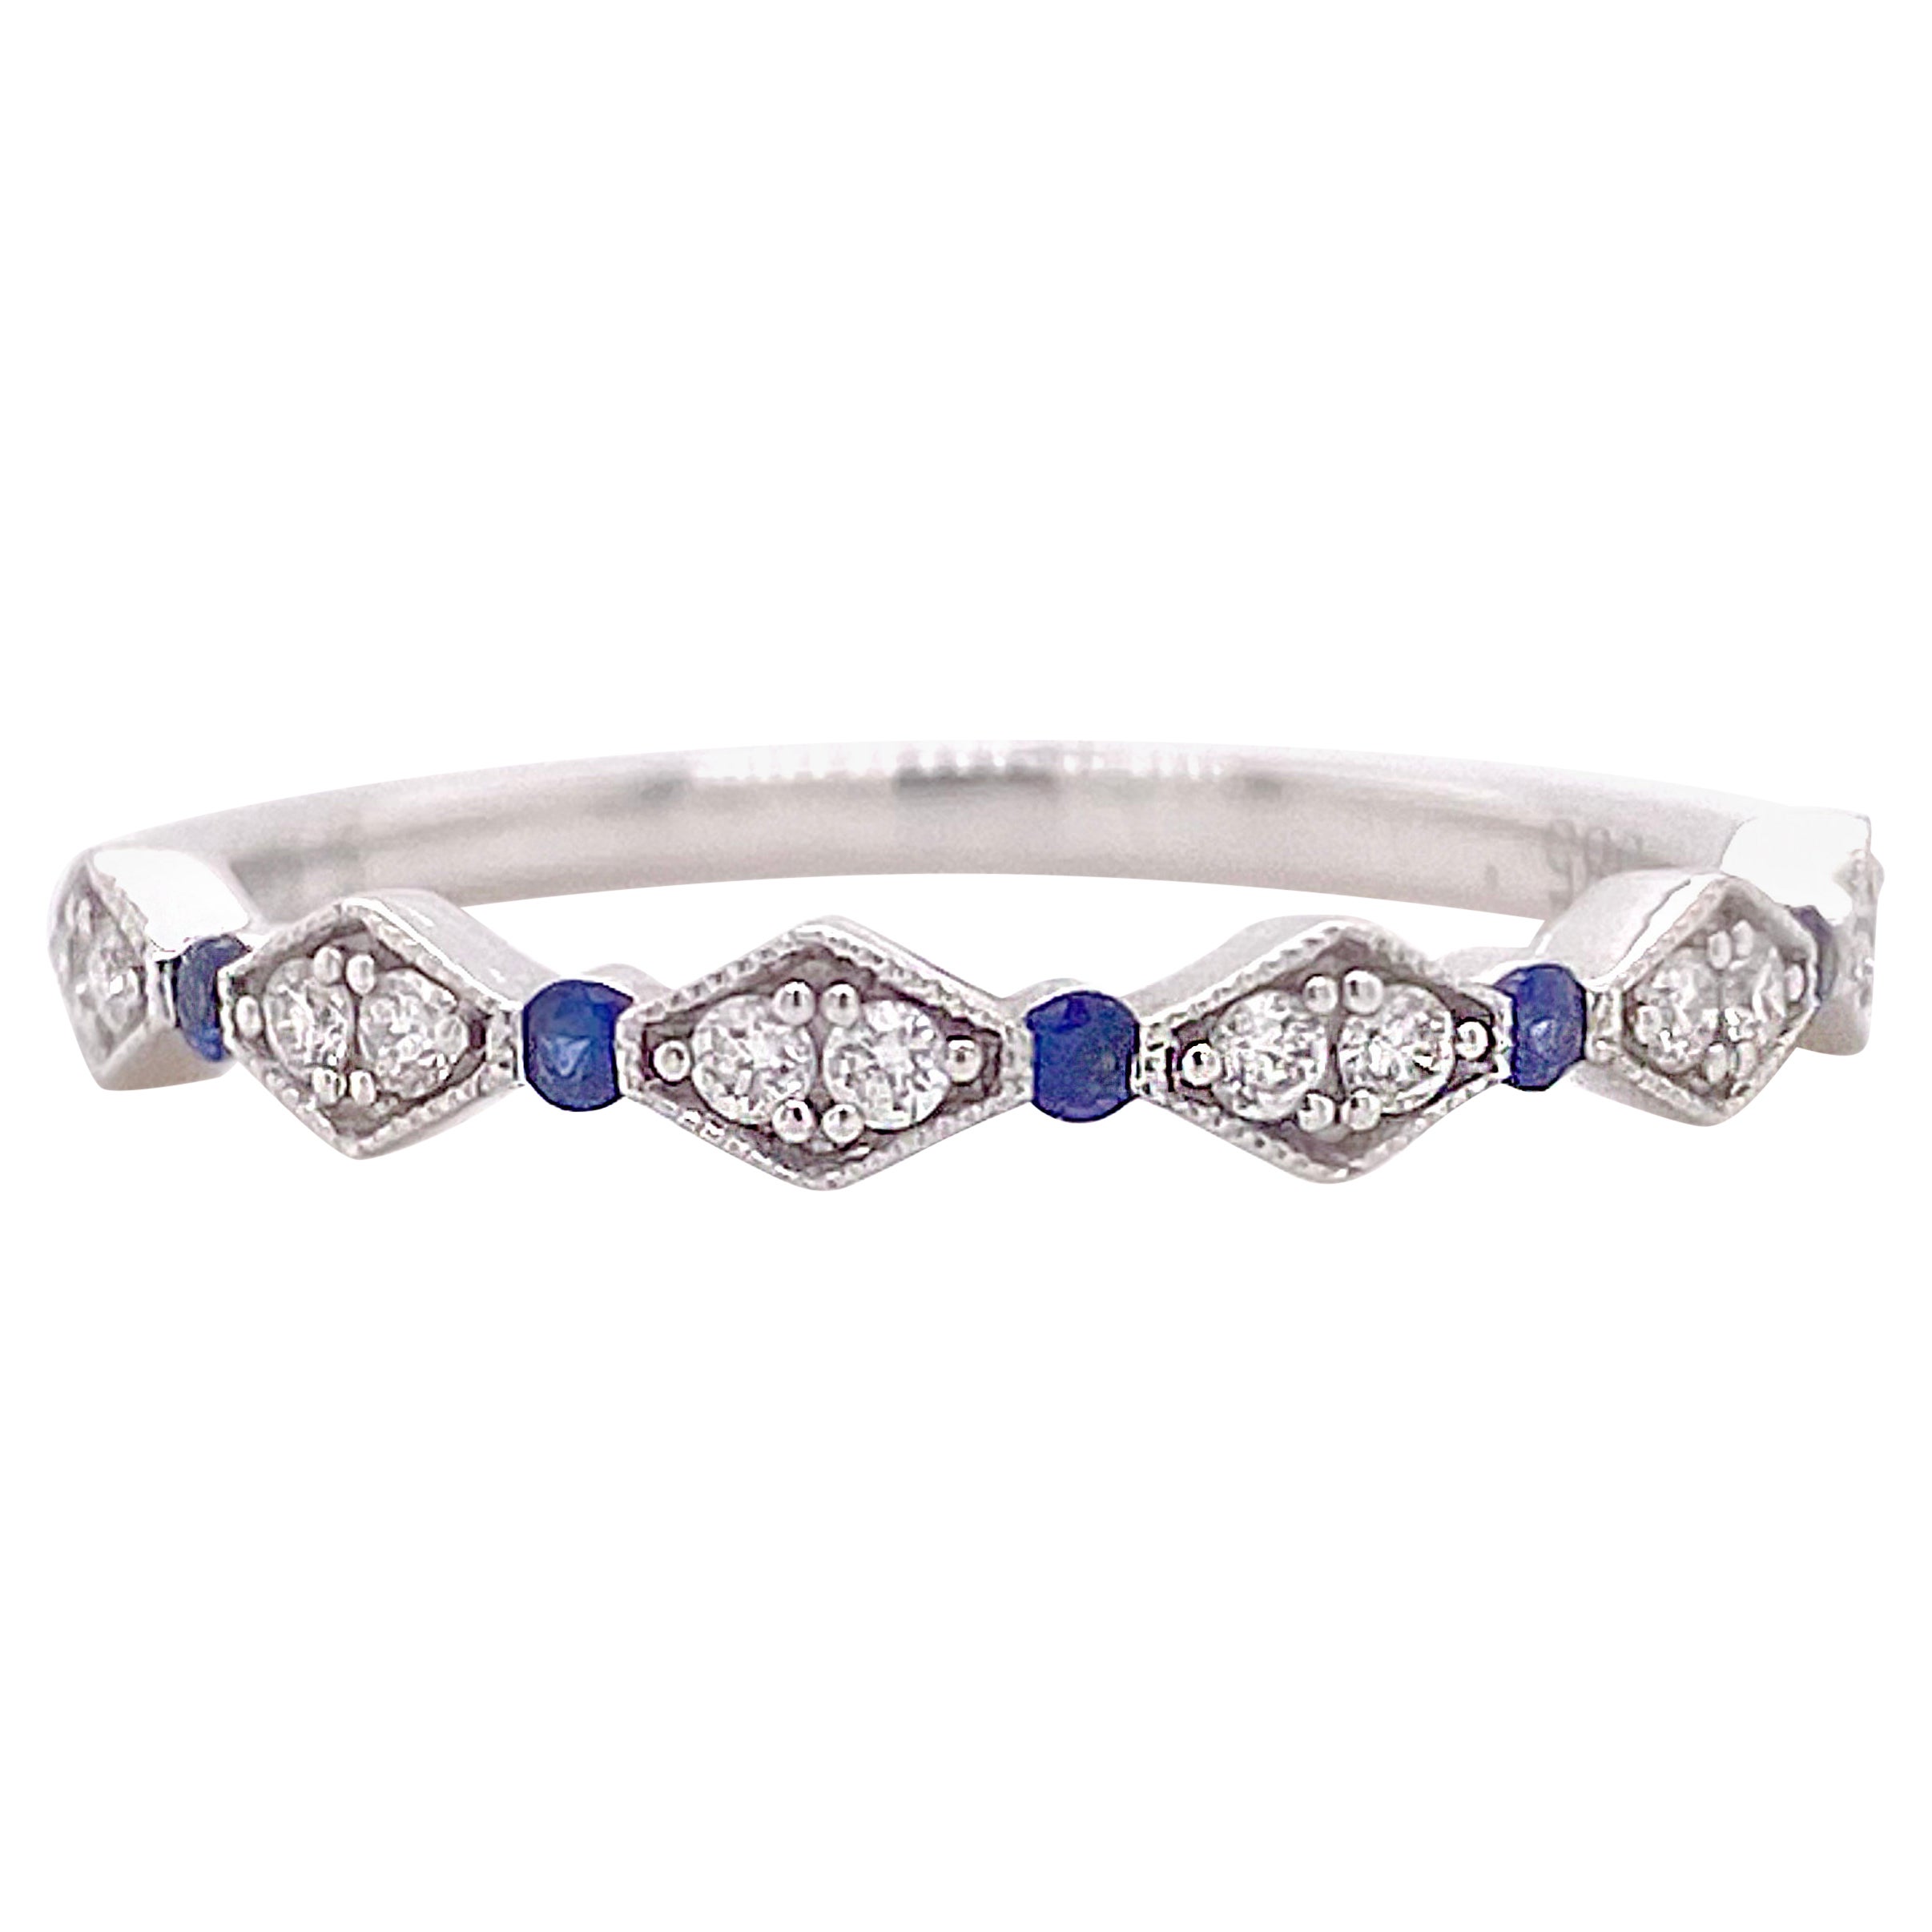 Diamond Sapphire Band, White Gold Wedding Ring, Stackable Band 15 Gemstones